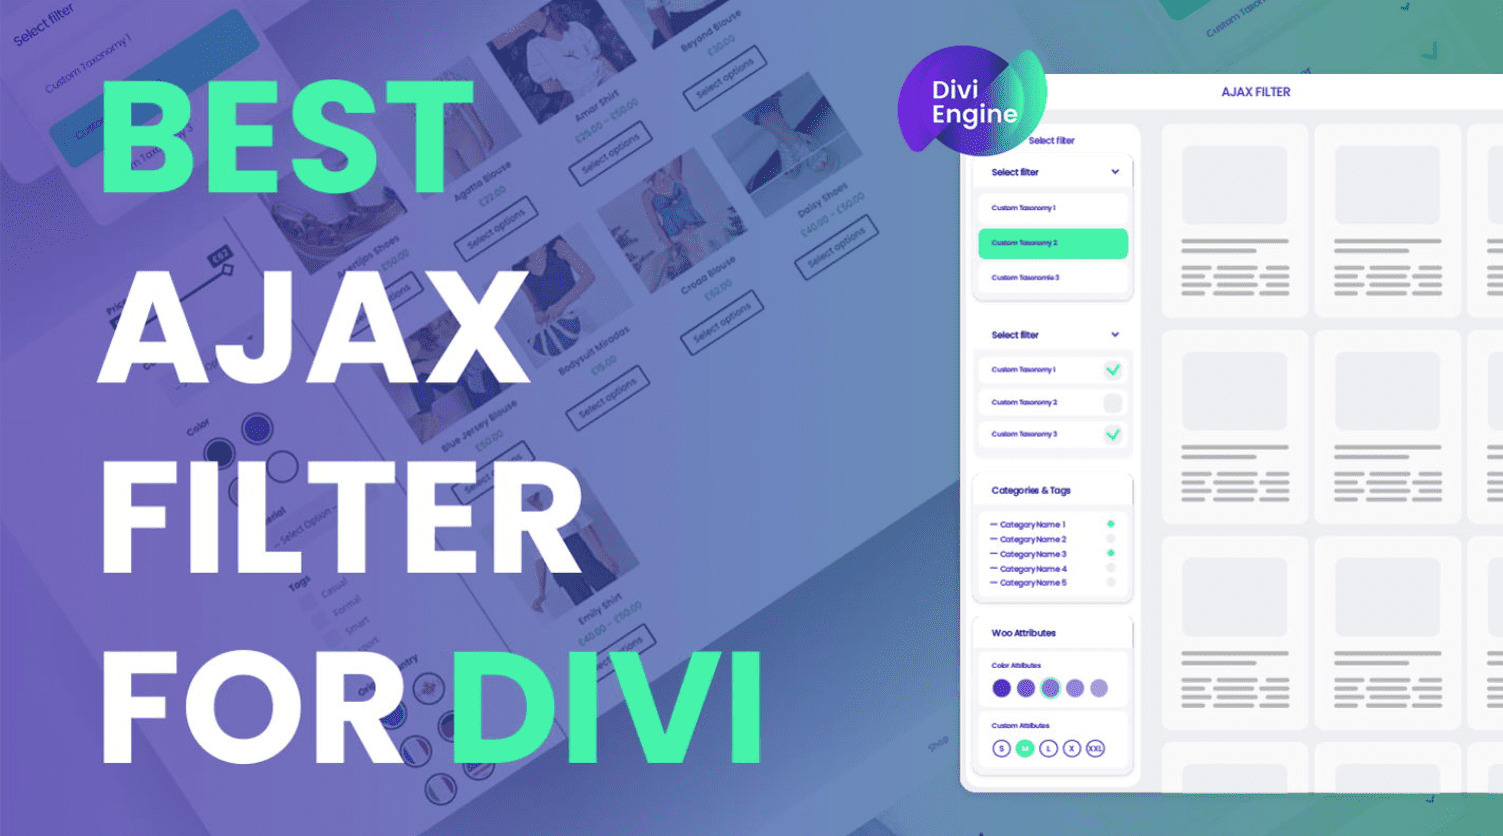 Where to Purchase Divi Ajax Filter